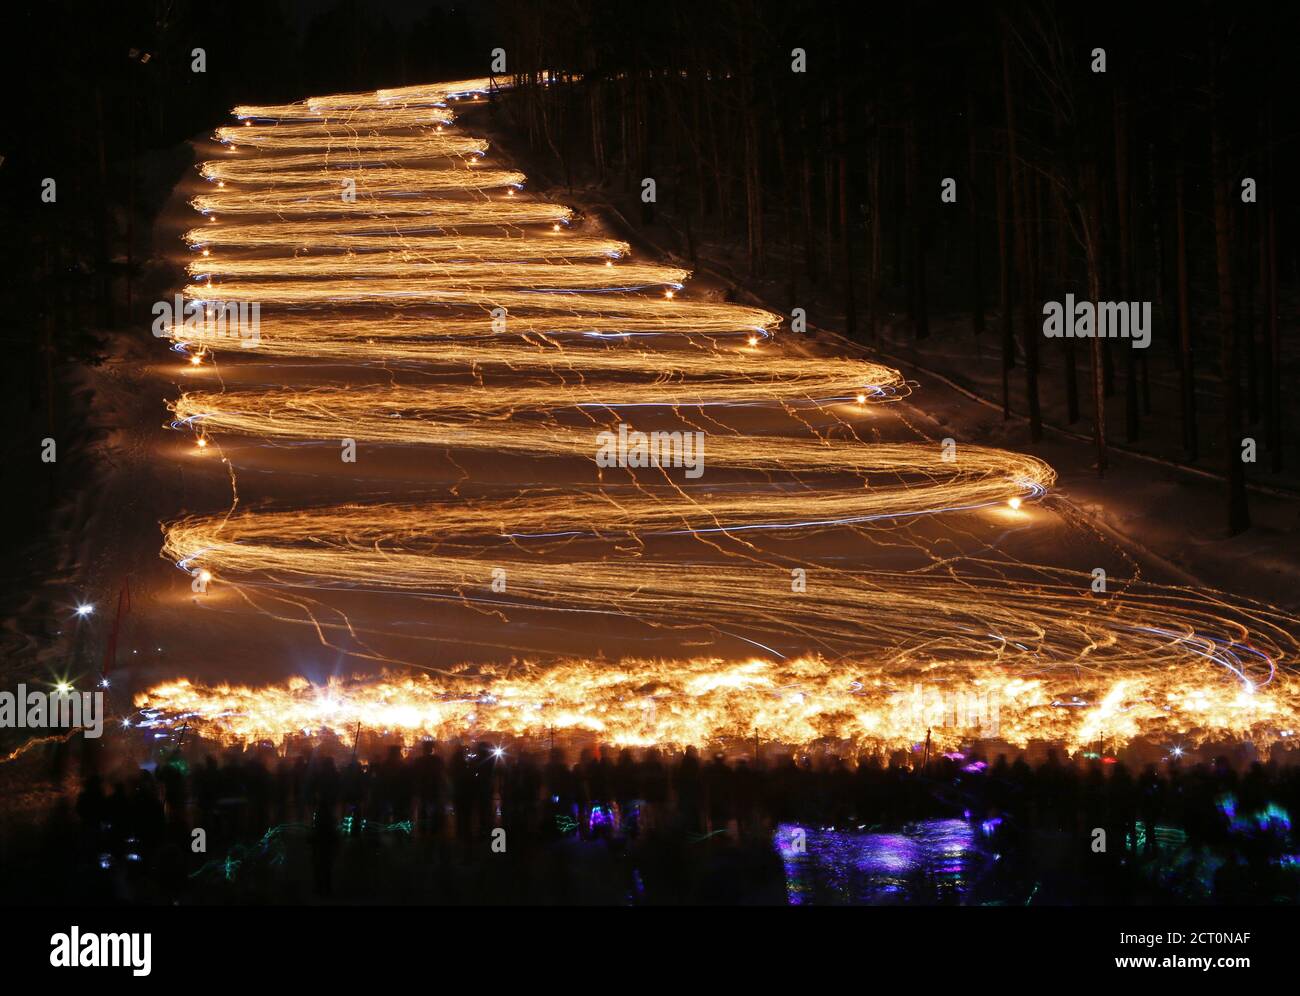 Hundreds of skiers and snowboarders hold lit torches and flashlights while descending from a slope during an annual festival in the Siberian town of Zheleznogorsk near Krasnoyarsk, Russia March 3, 2018. Picture taken with long exposure on March 3, 2018. REUTERS/Ilya Naymushin Stock Photo